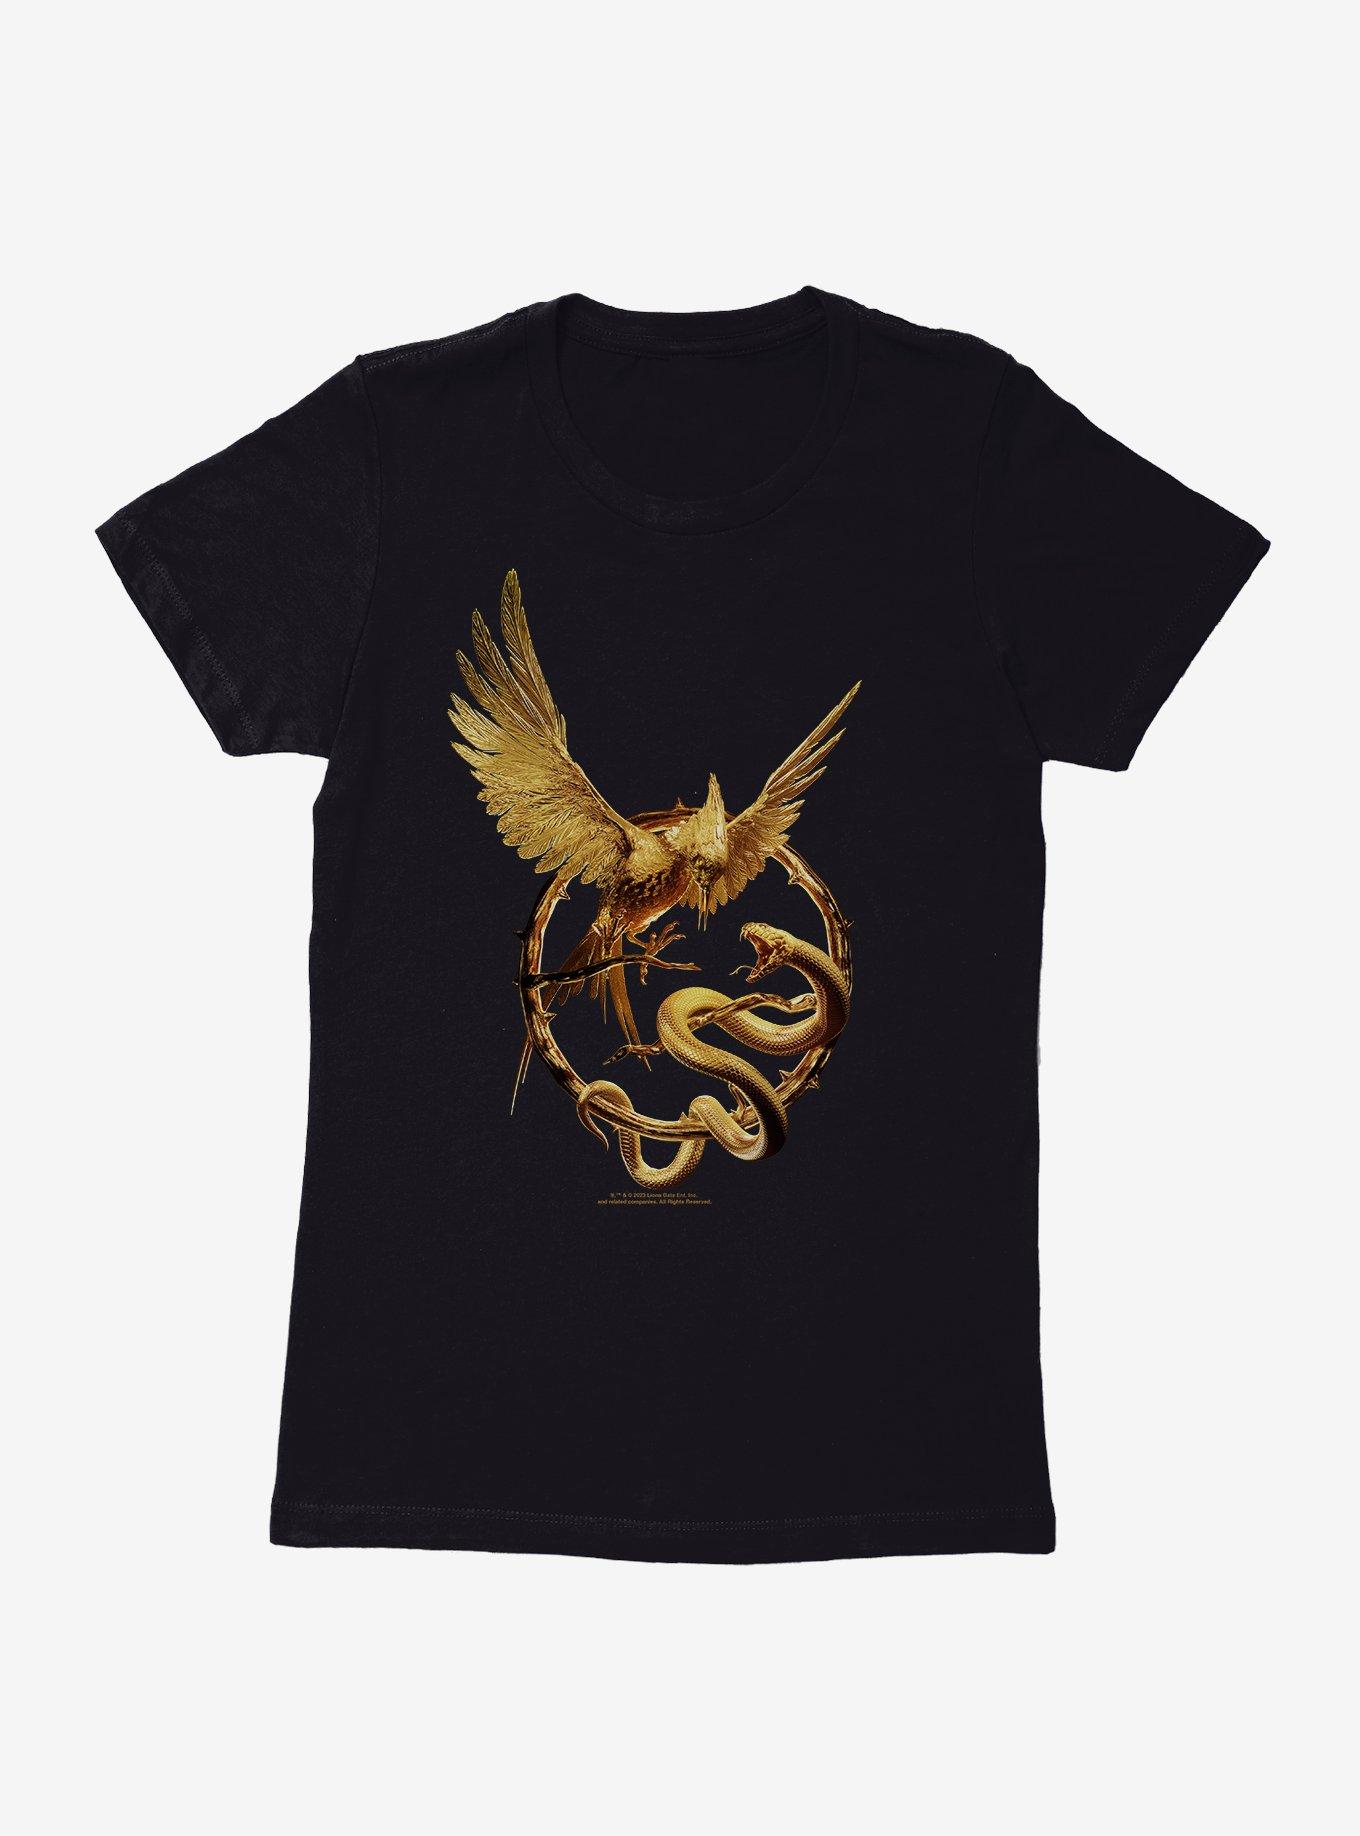 Hunger Games: The Ballad Of Songbirds And Snakes Womens T-Shirt, BLACK, hi-res